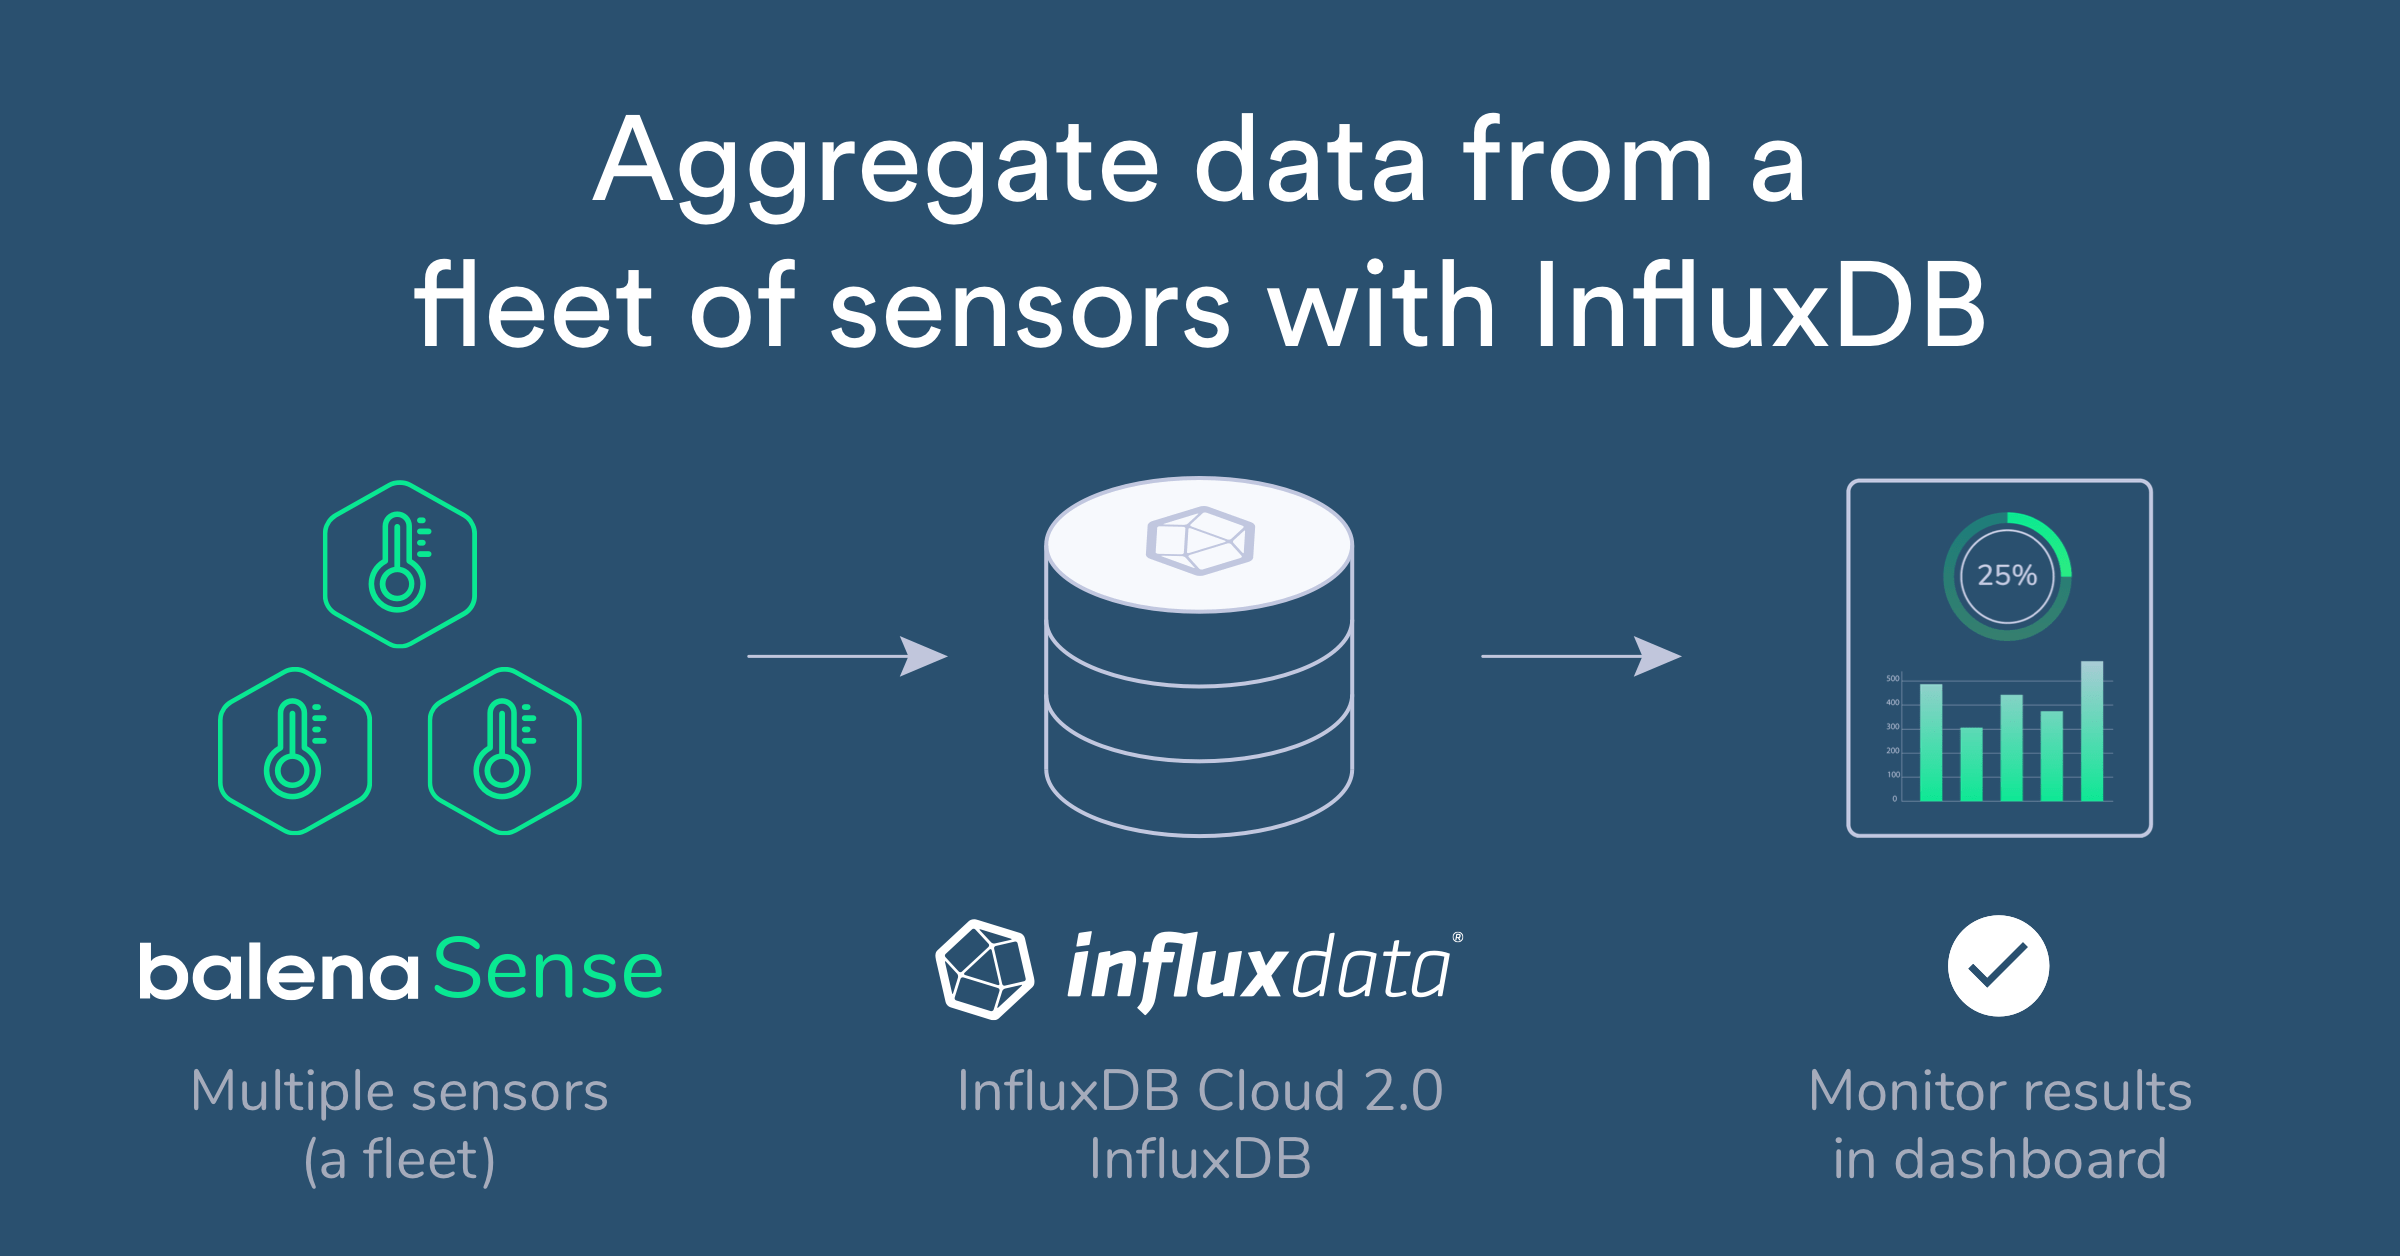 Aggregate data from a fleet of sensors with balenaSense and InfluxDB